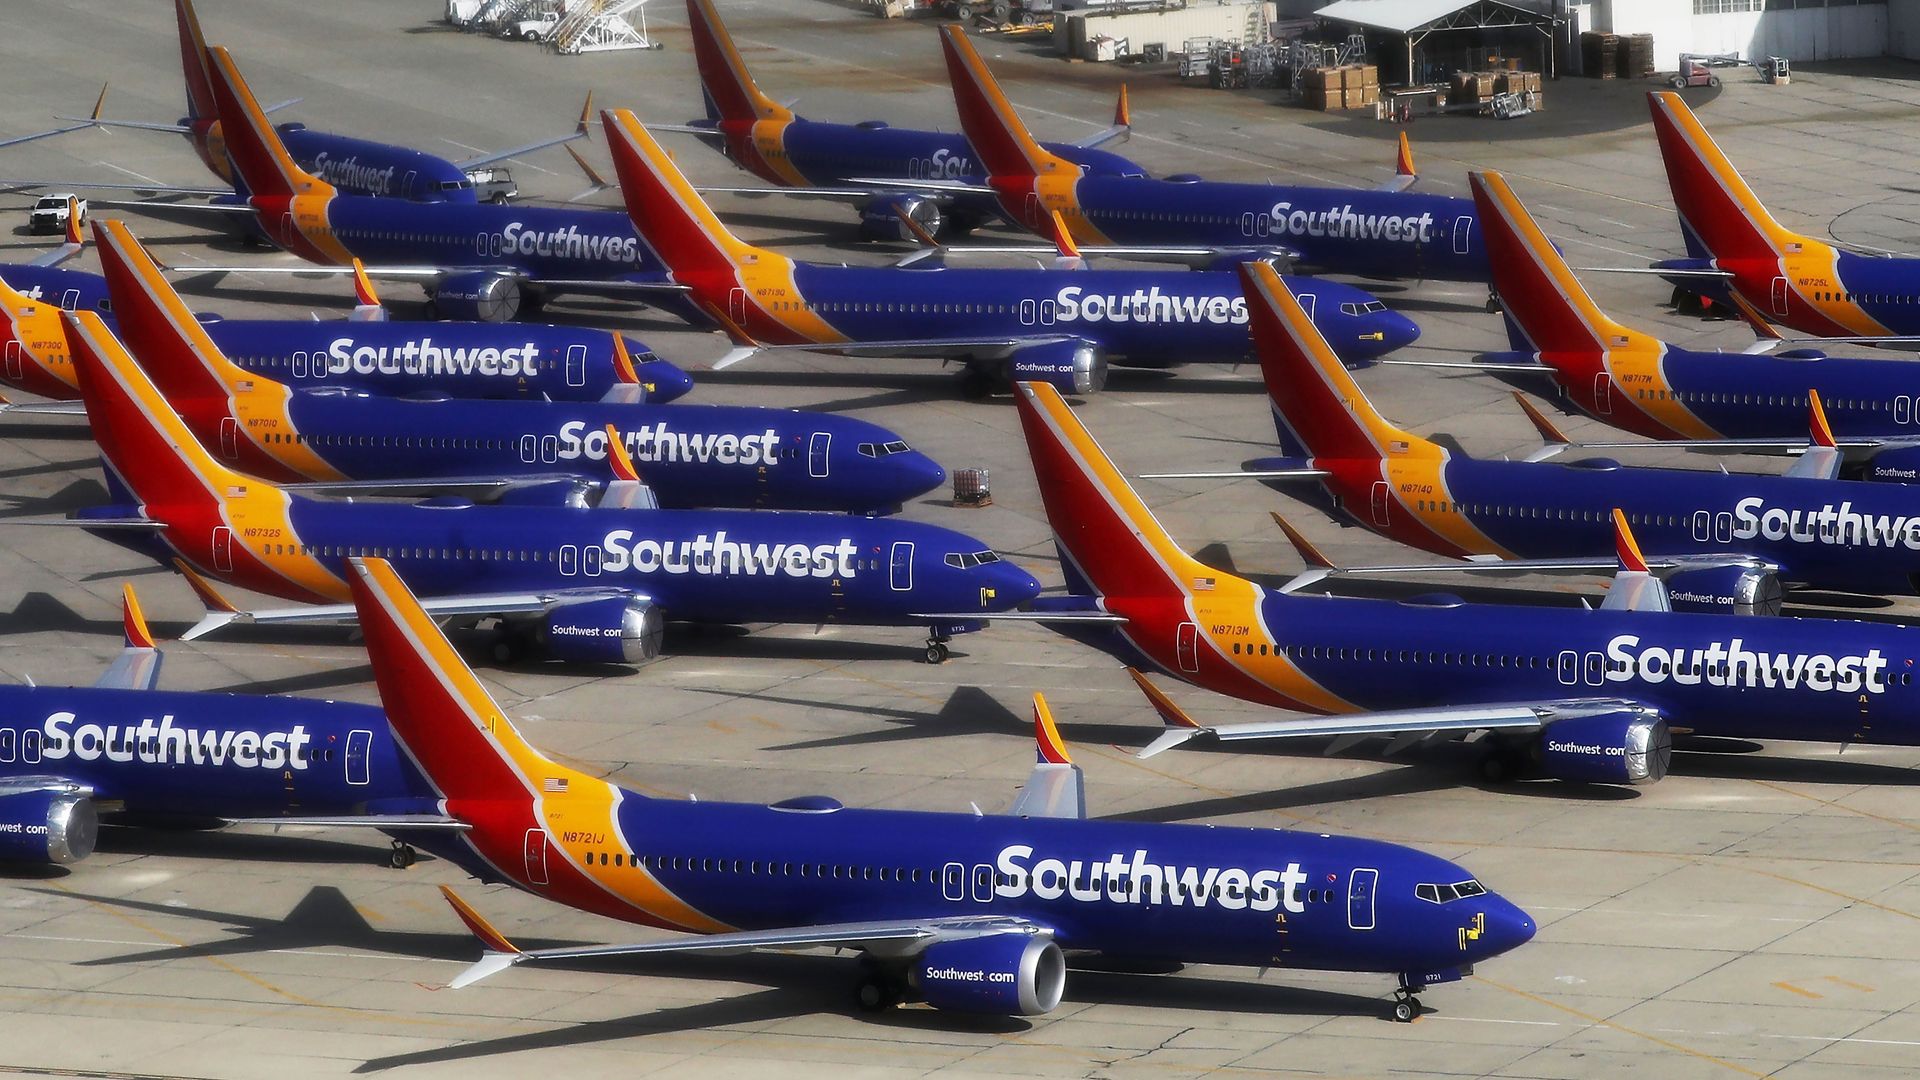 Southwest pilots' union head blasts Boeing over handling of 737 MAX